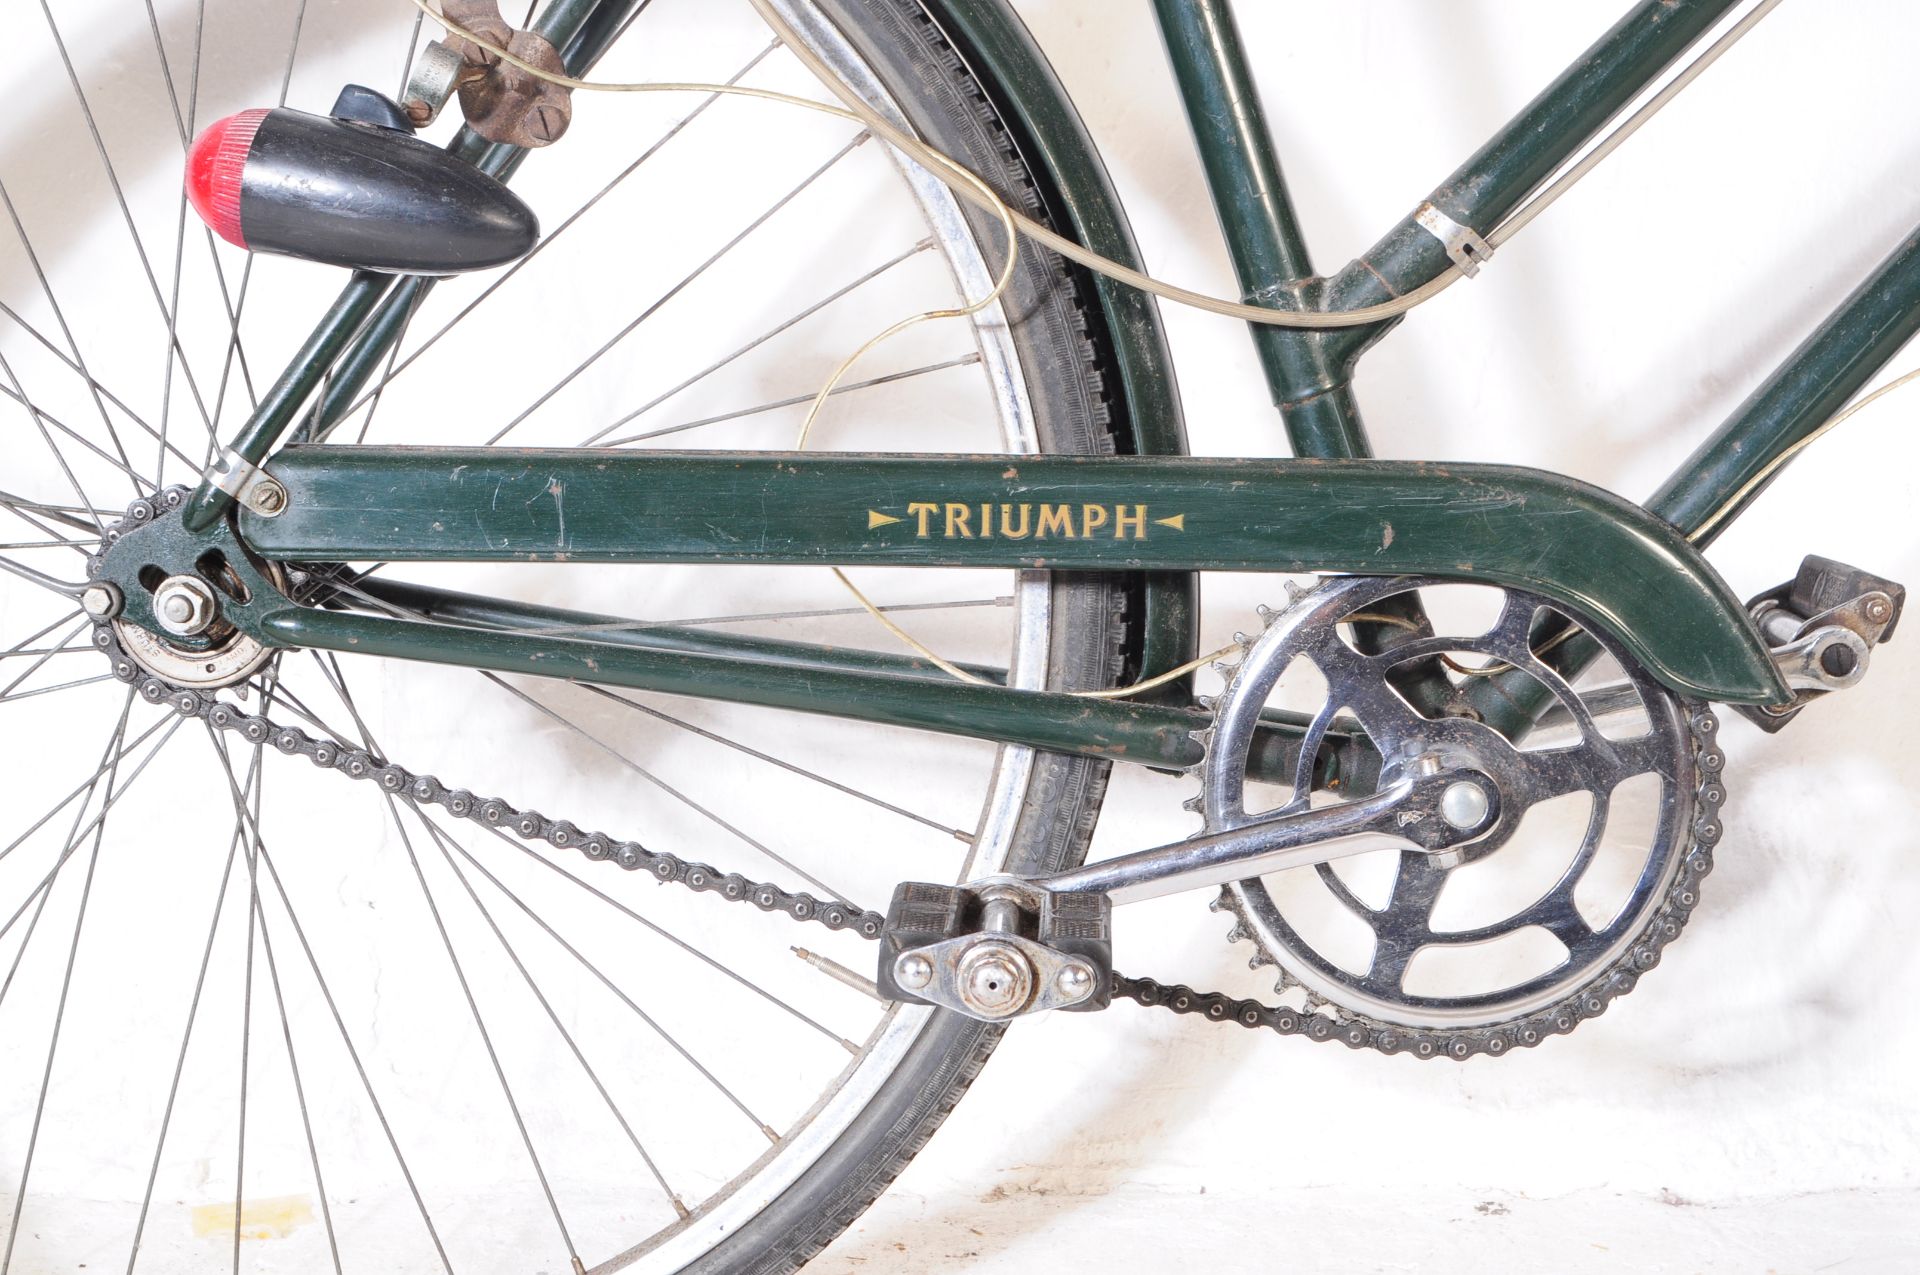 TRIUMPH CYCLE COMPANY - MID 20TH CENTURY BICYCLE BIKE - Image 7 of 7